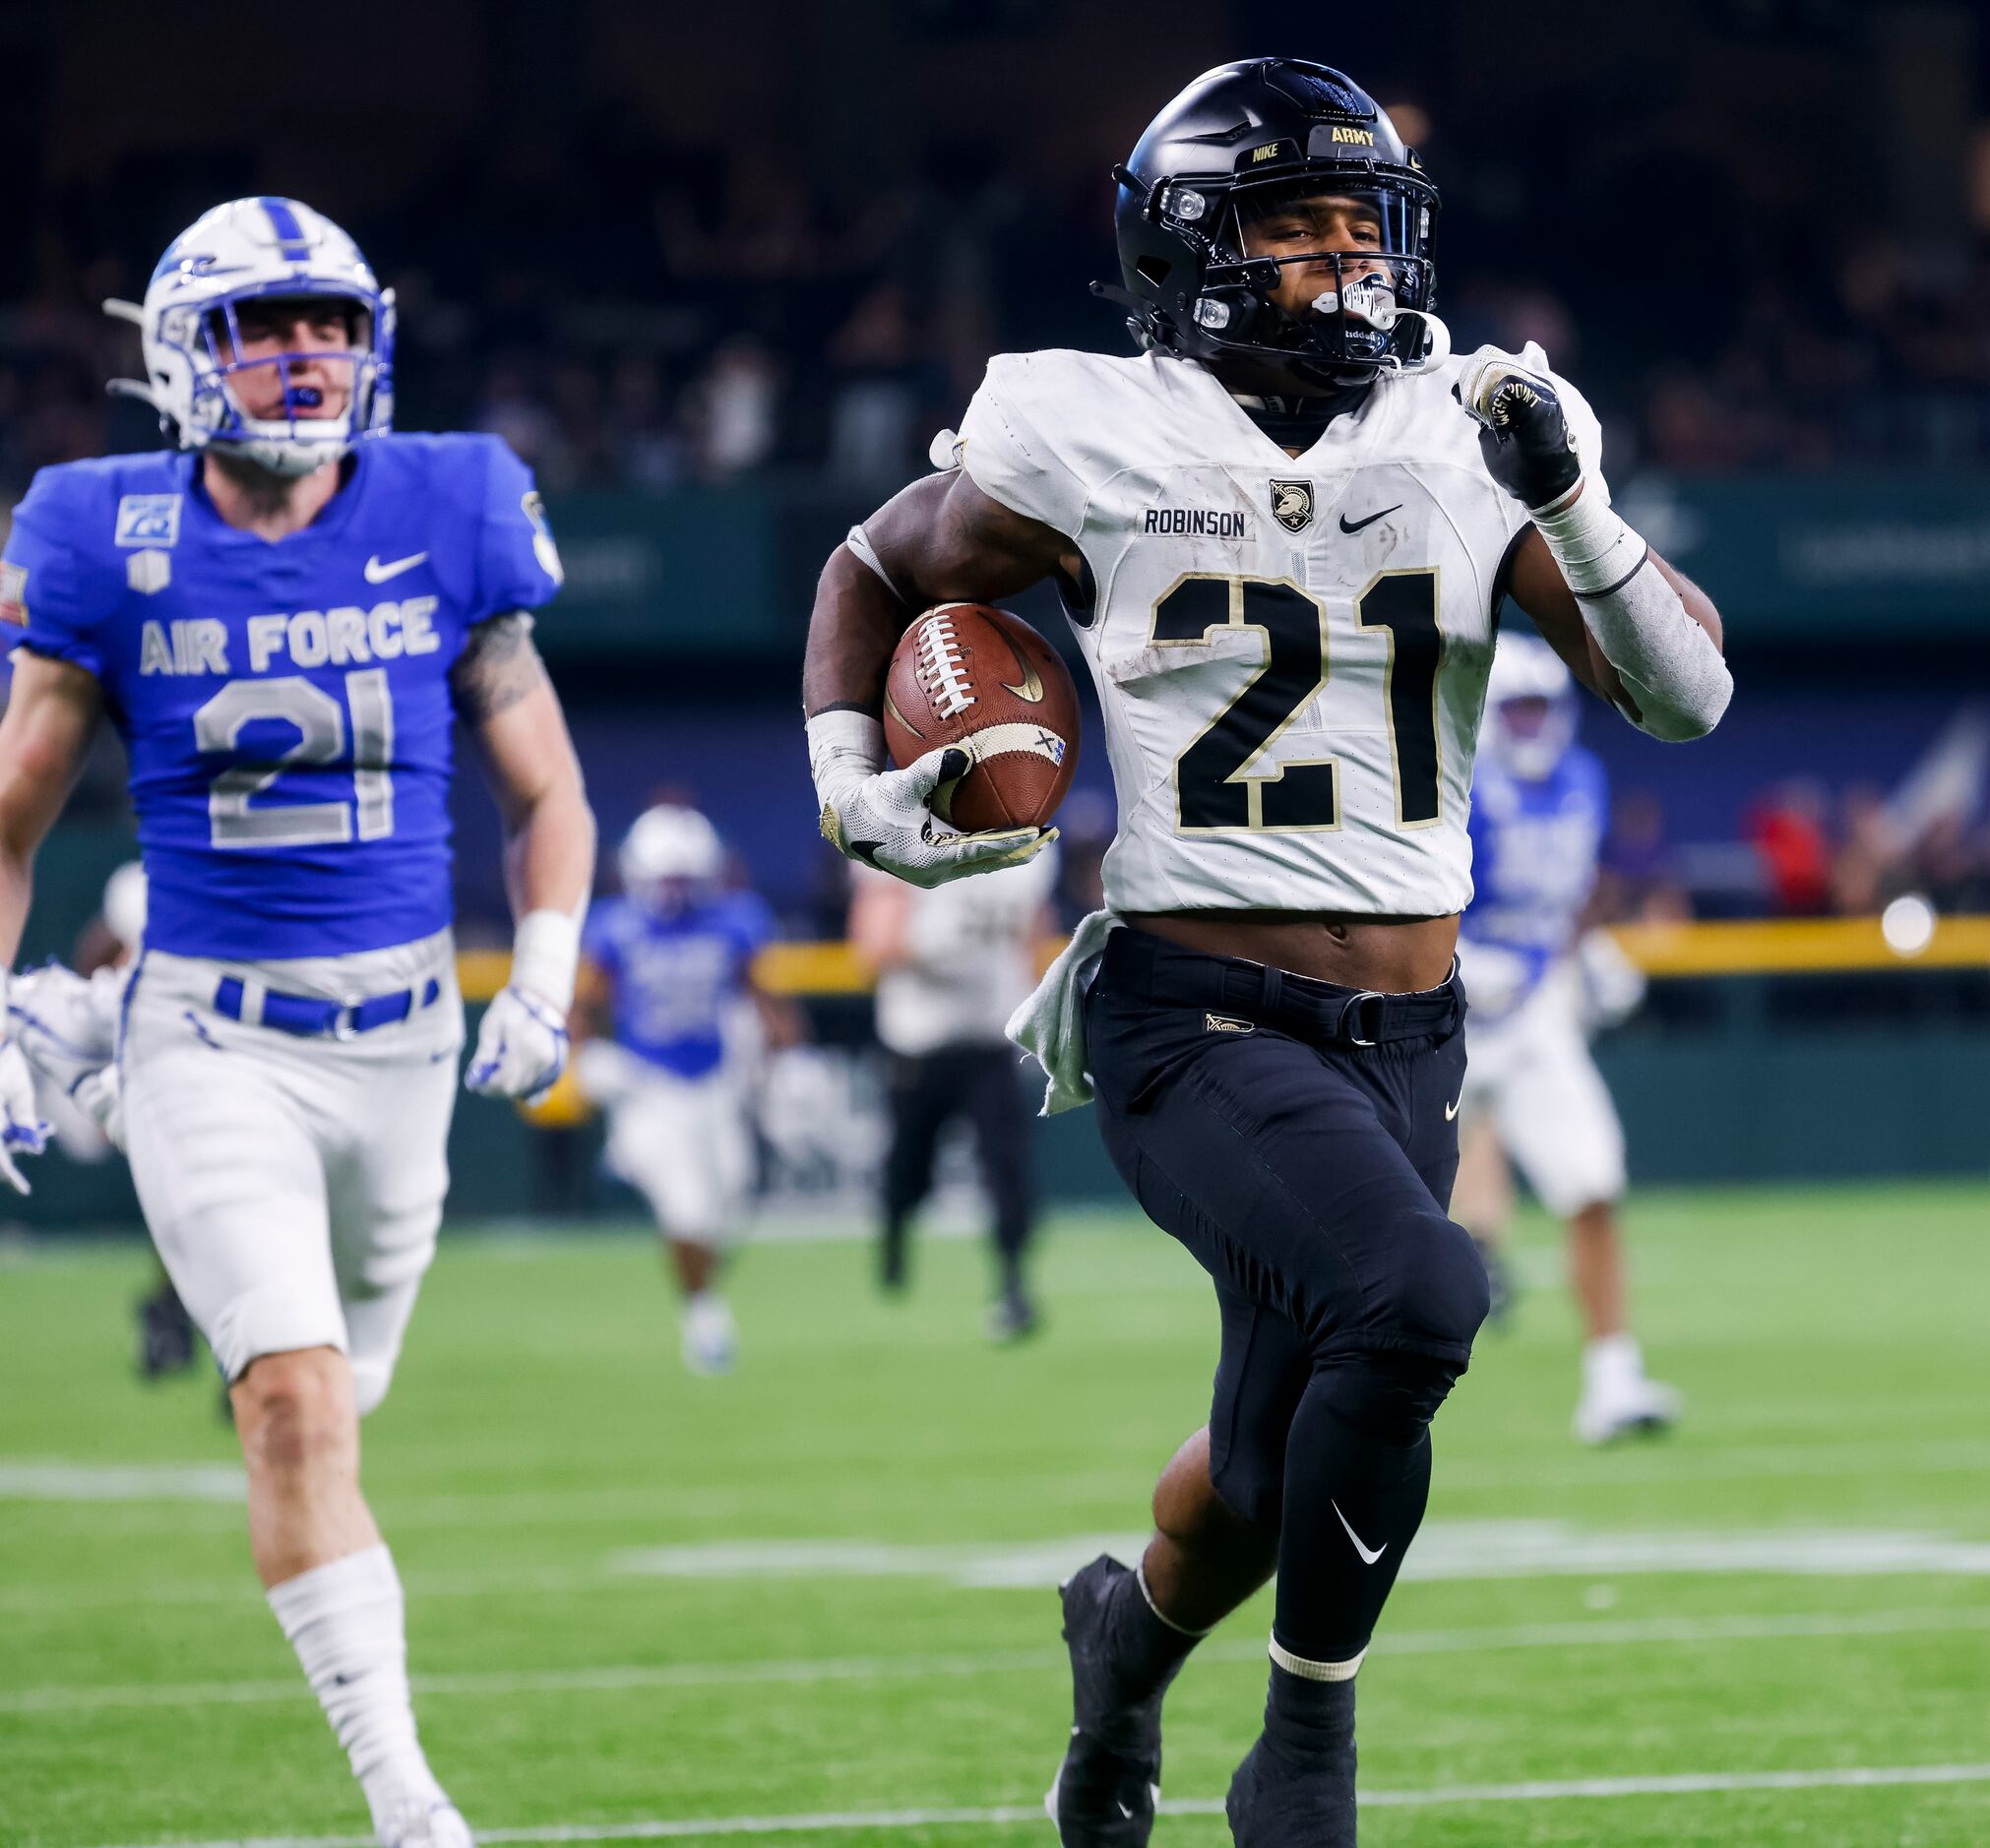 Army Black Knights running back Tyrell Robinson (21) outruns Air Force Falcons safety Corvan...